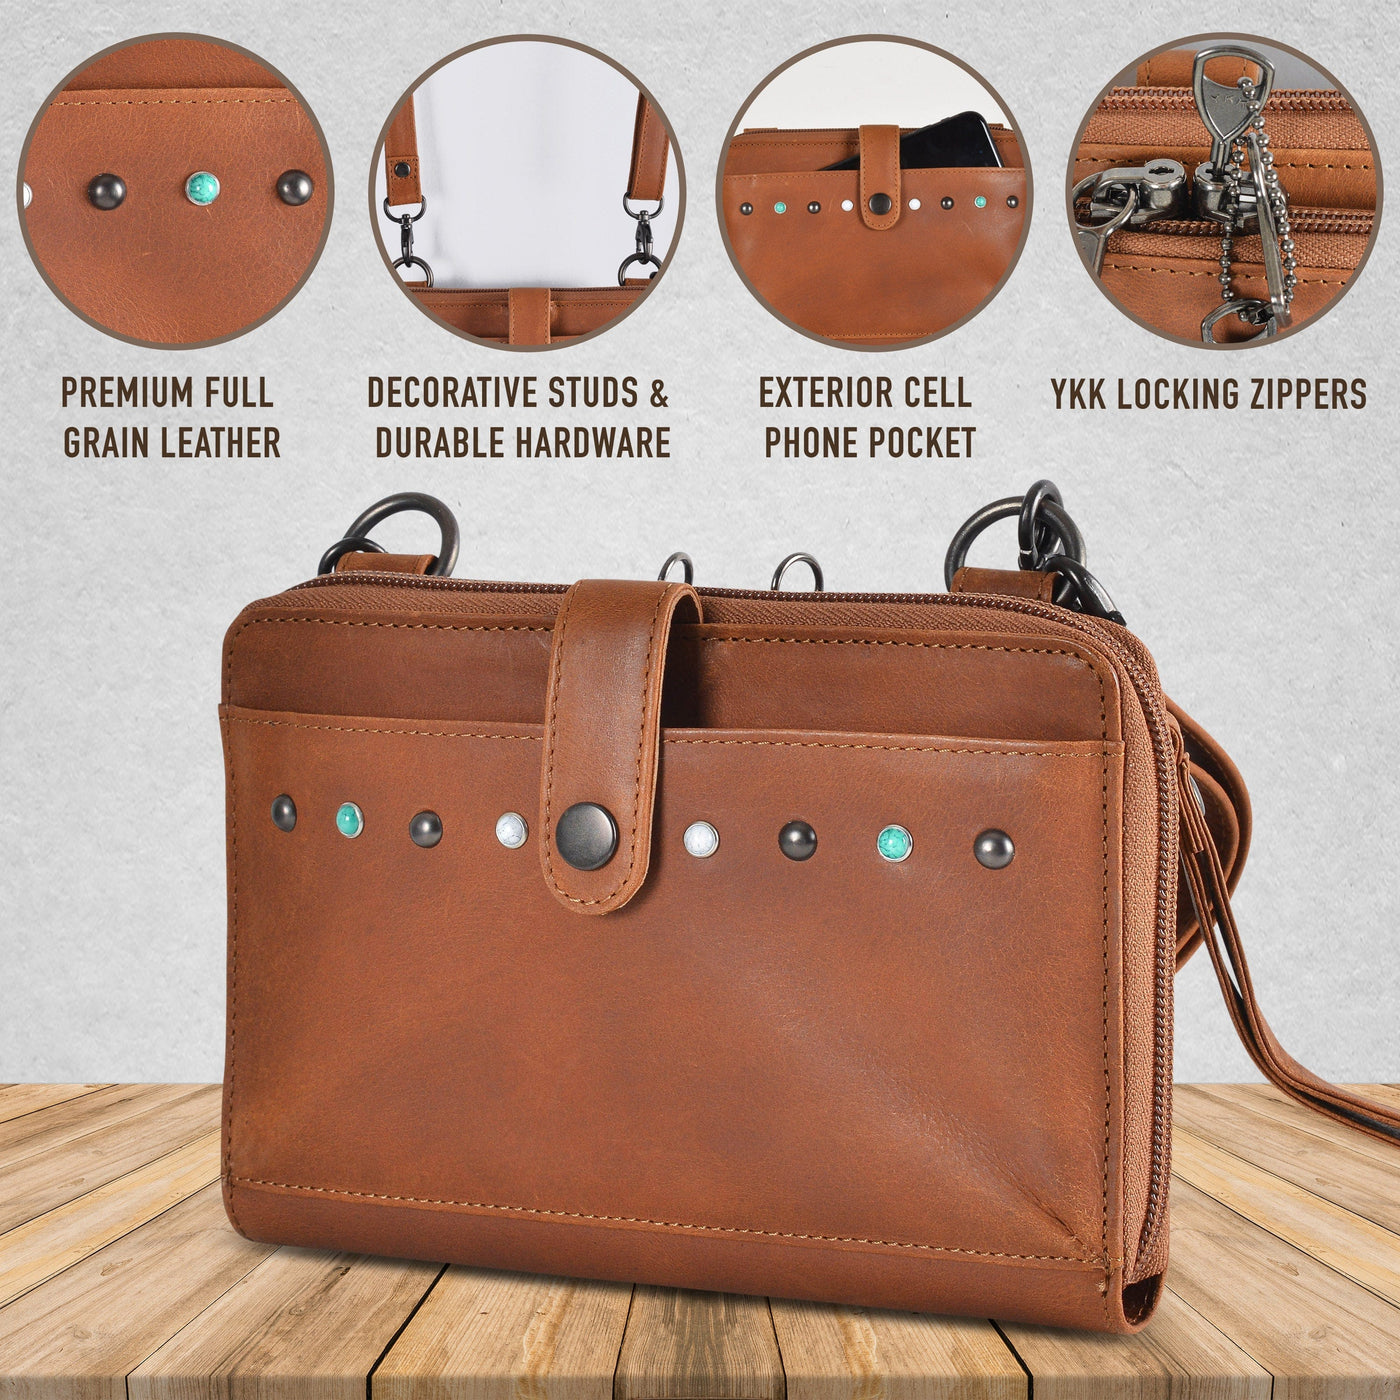 Concealed Carry Millie Leather Crossbody Organizer -  YKK Locking with Universal Holster for Pistol -  Lightweight Concealed Carry -  CCW Pistol Bag -  Women Conceal Carry -  crossbody handgun bag -  crossbody bags for everyday use -  Lady Conceal -  Unique Hide Purse -  Locking YKK Purse -  Fanny Pack for Gun and Pistol -  Easy CCW -  Fast Draw Bag -  Secure Gun Bag